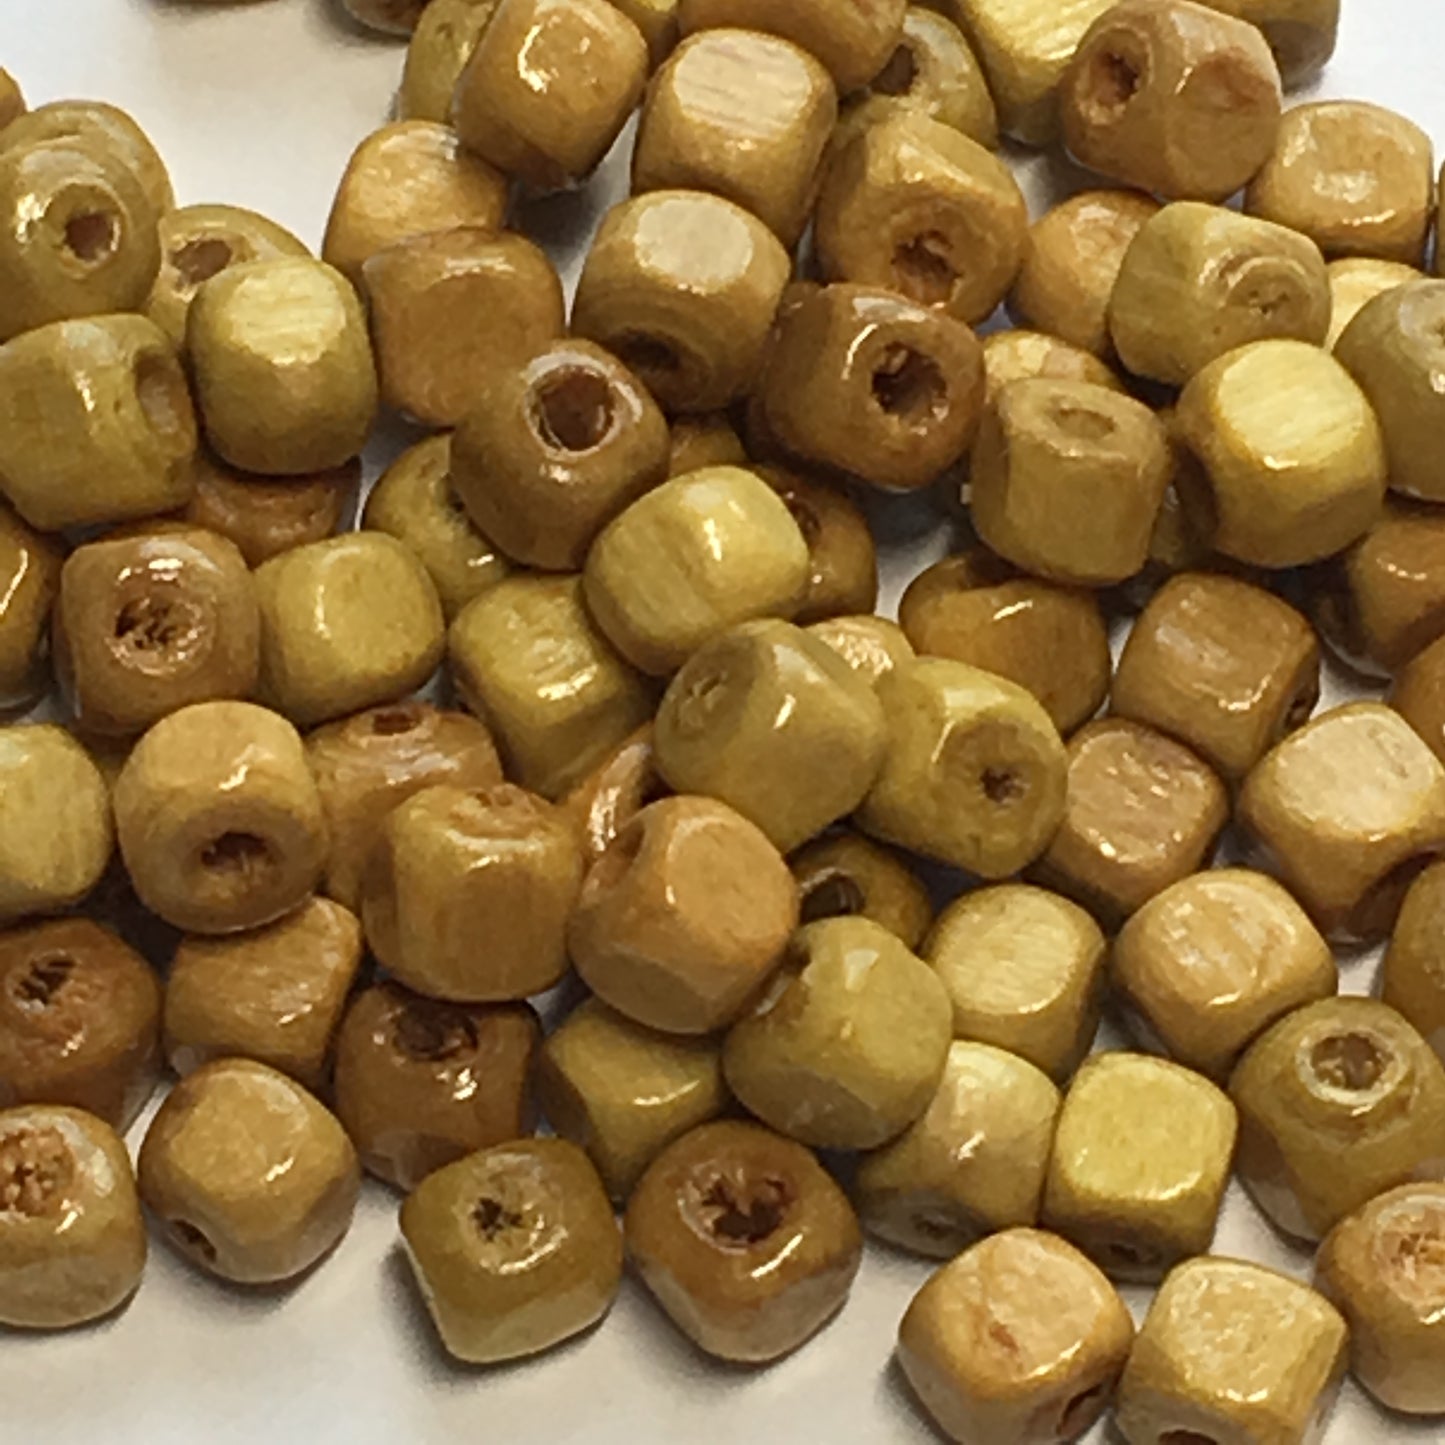 Brown, Light or Medium Darkness Wood Cube / Square Beads, 4 mm  - 100 Beads